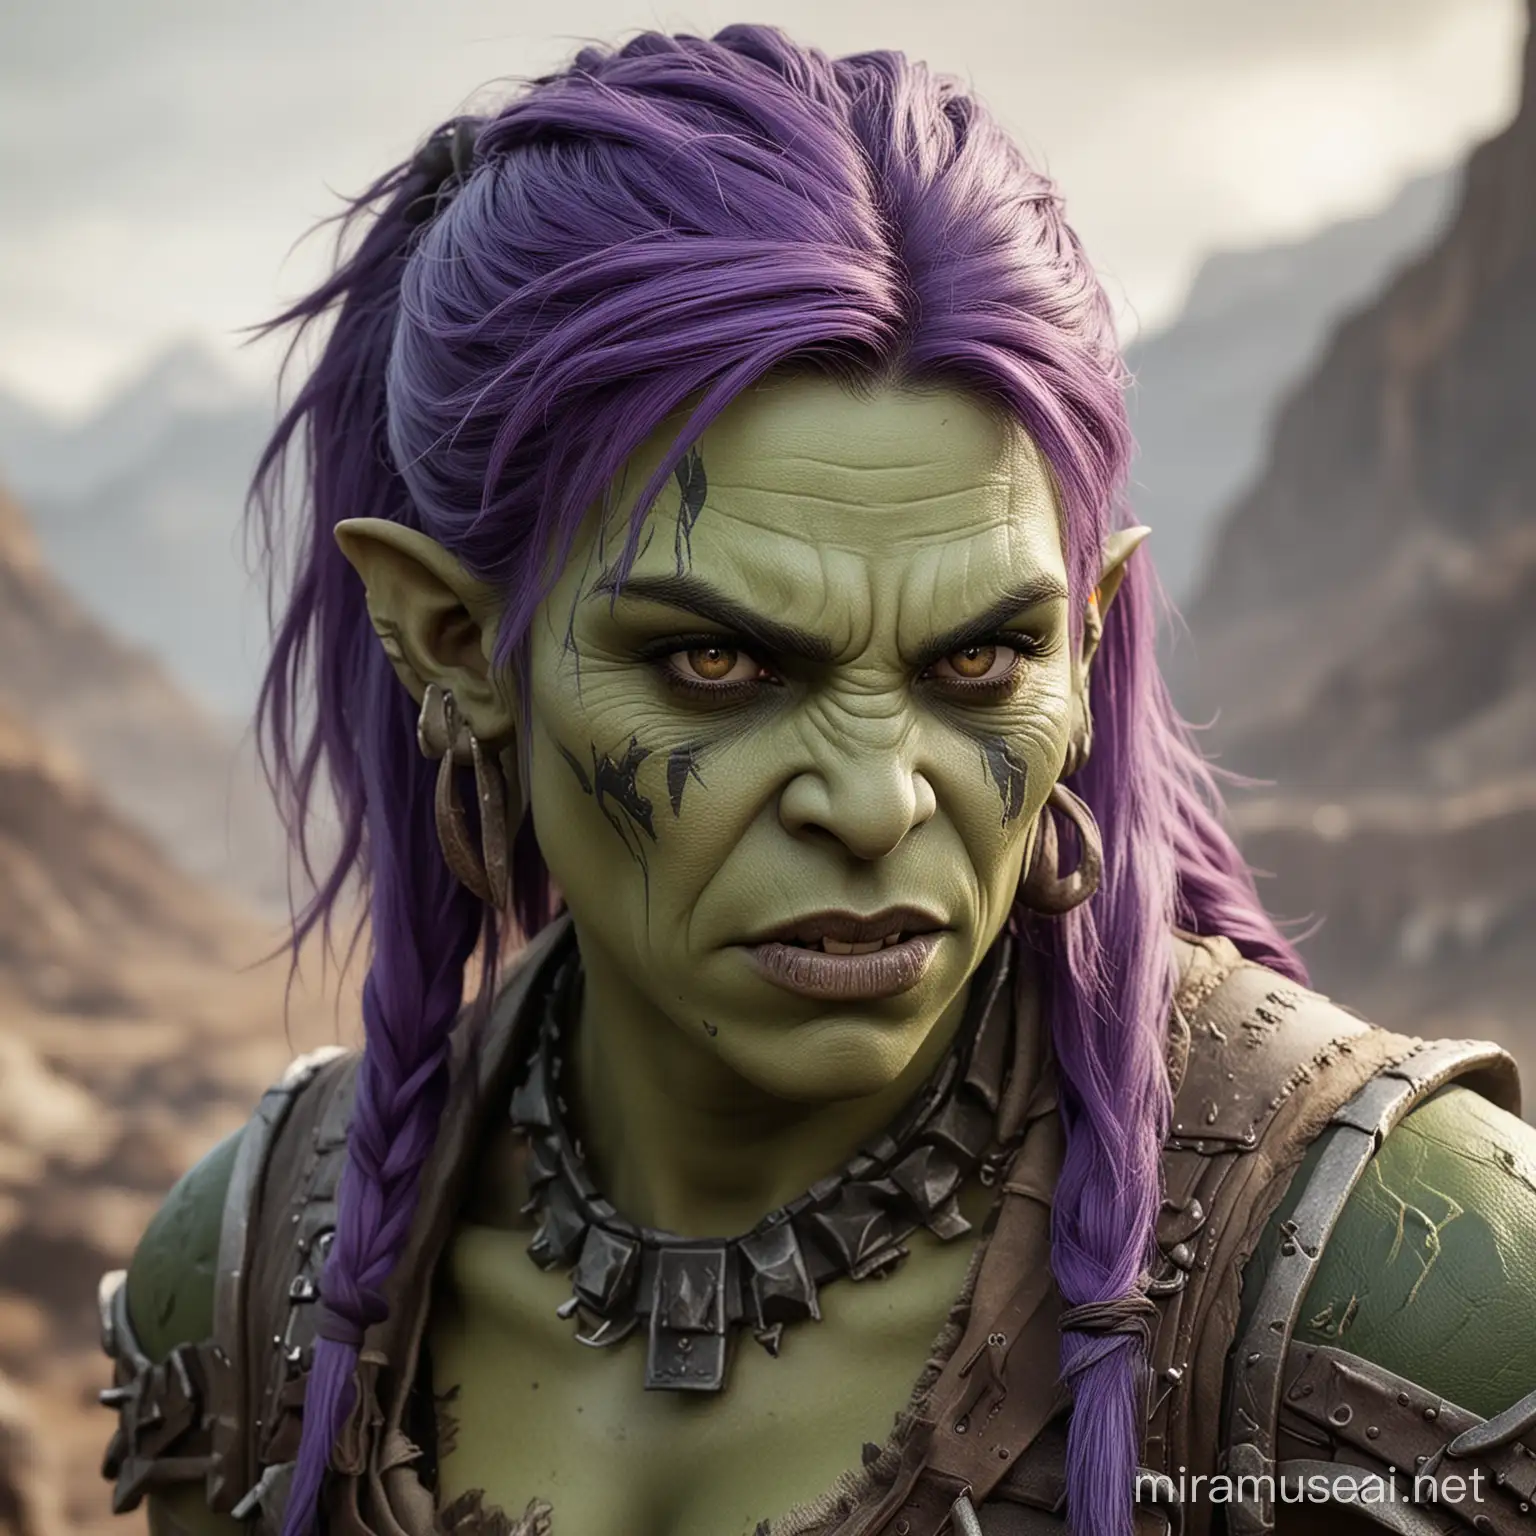 Strong Female Orc with Purple Hair and Long Tusks